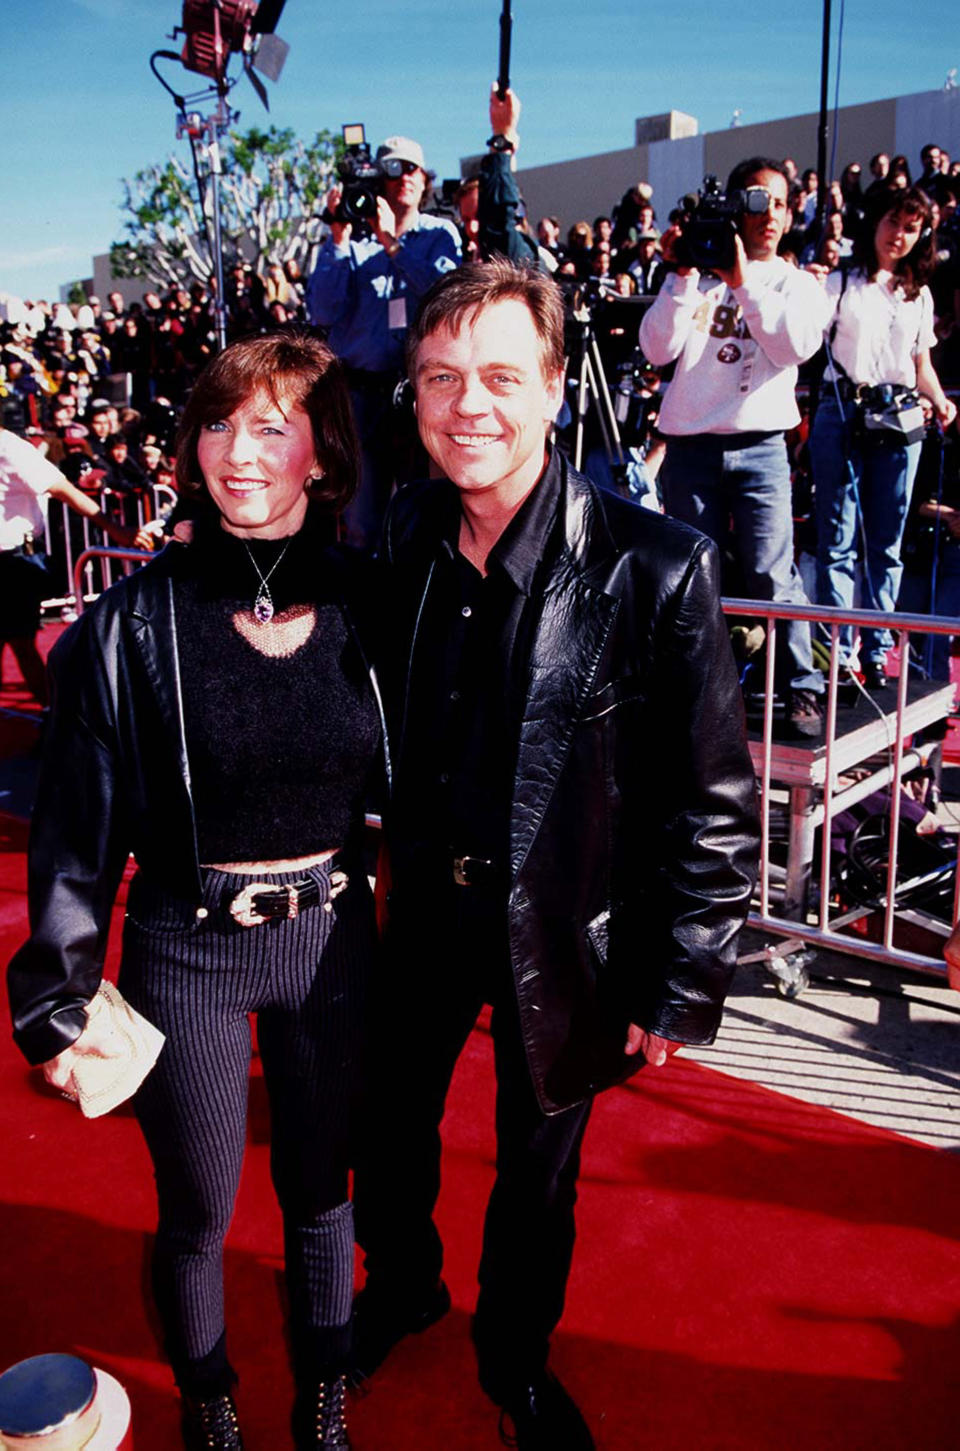 Mark Hamill (right) and guest during Premiere of 'Star Wars: Special Edition' In 1997 at Westwood in Westwood, CA, United States. (Photo by Magma Agency/WireImage)